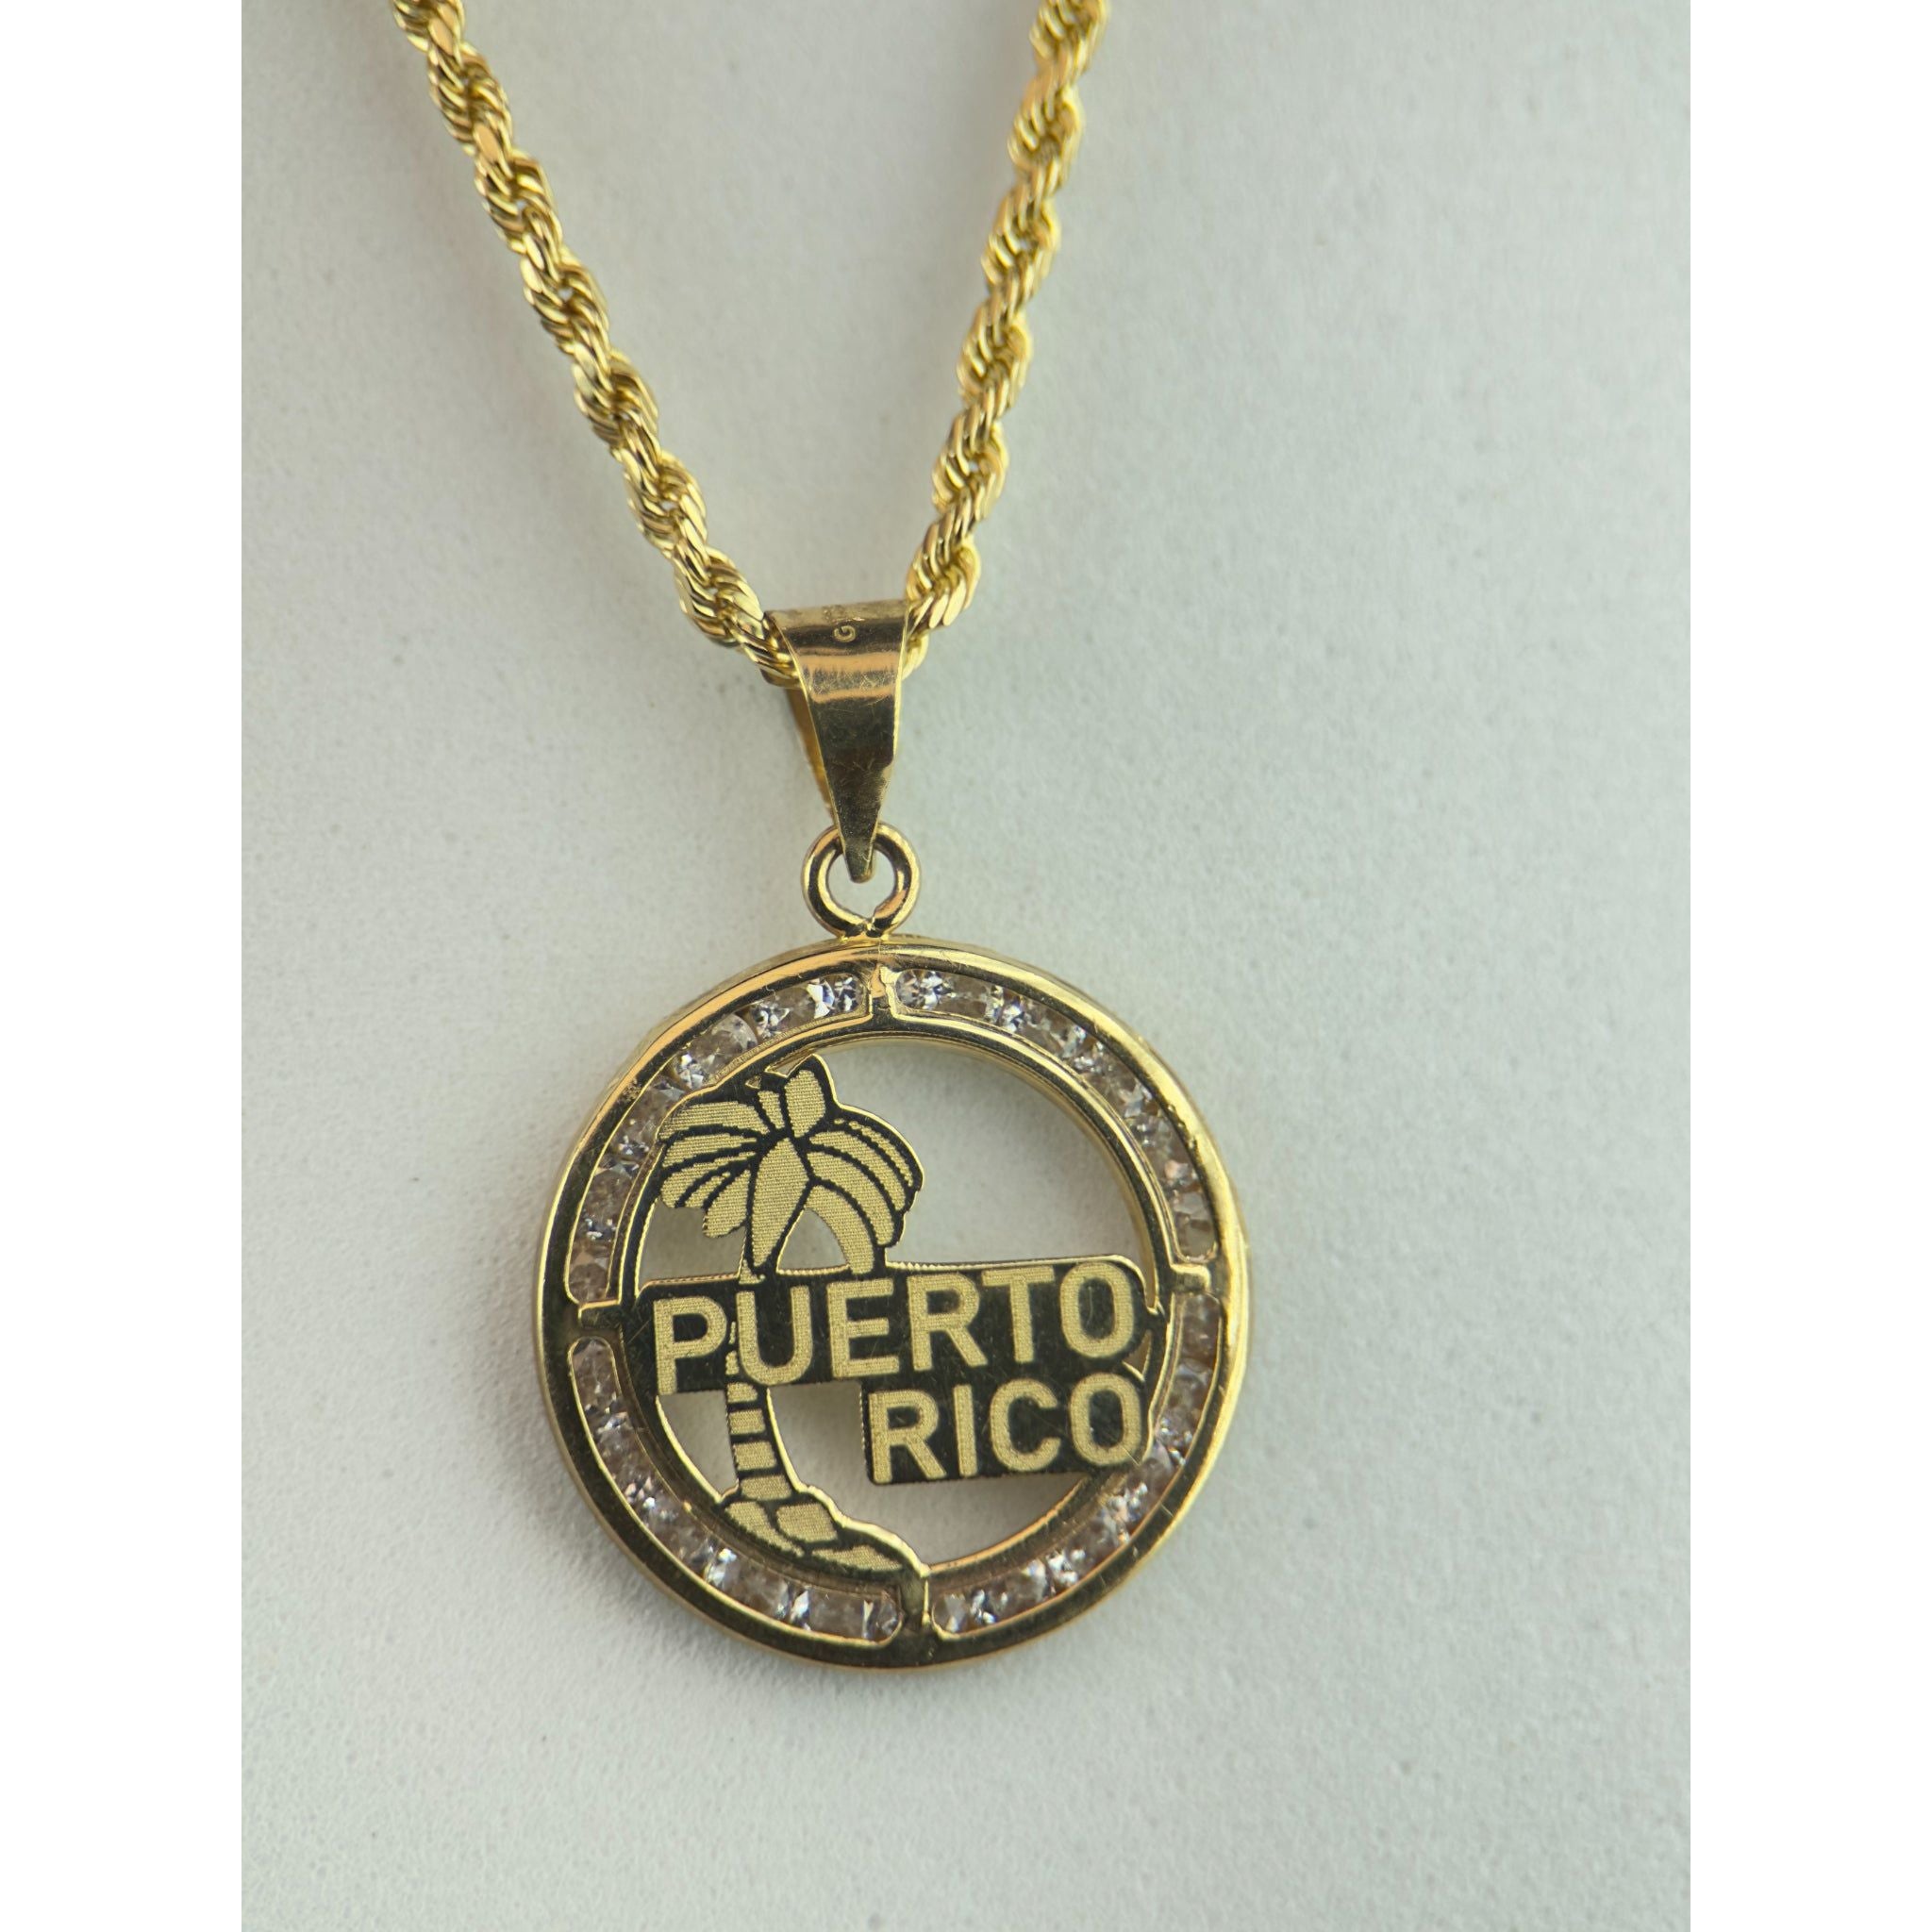 DR1935 - 10K Yellow Gold - Lab Created Stones - Gold Chain & Charm - 10K Puerto Rico Charm